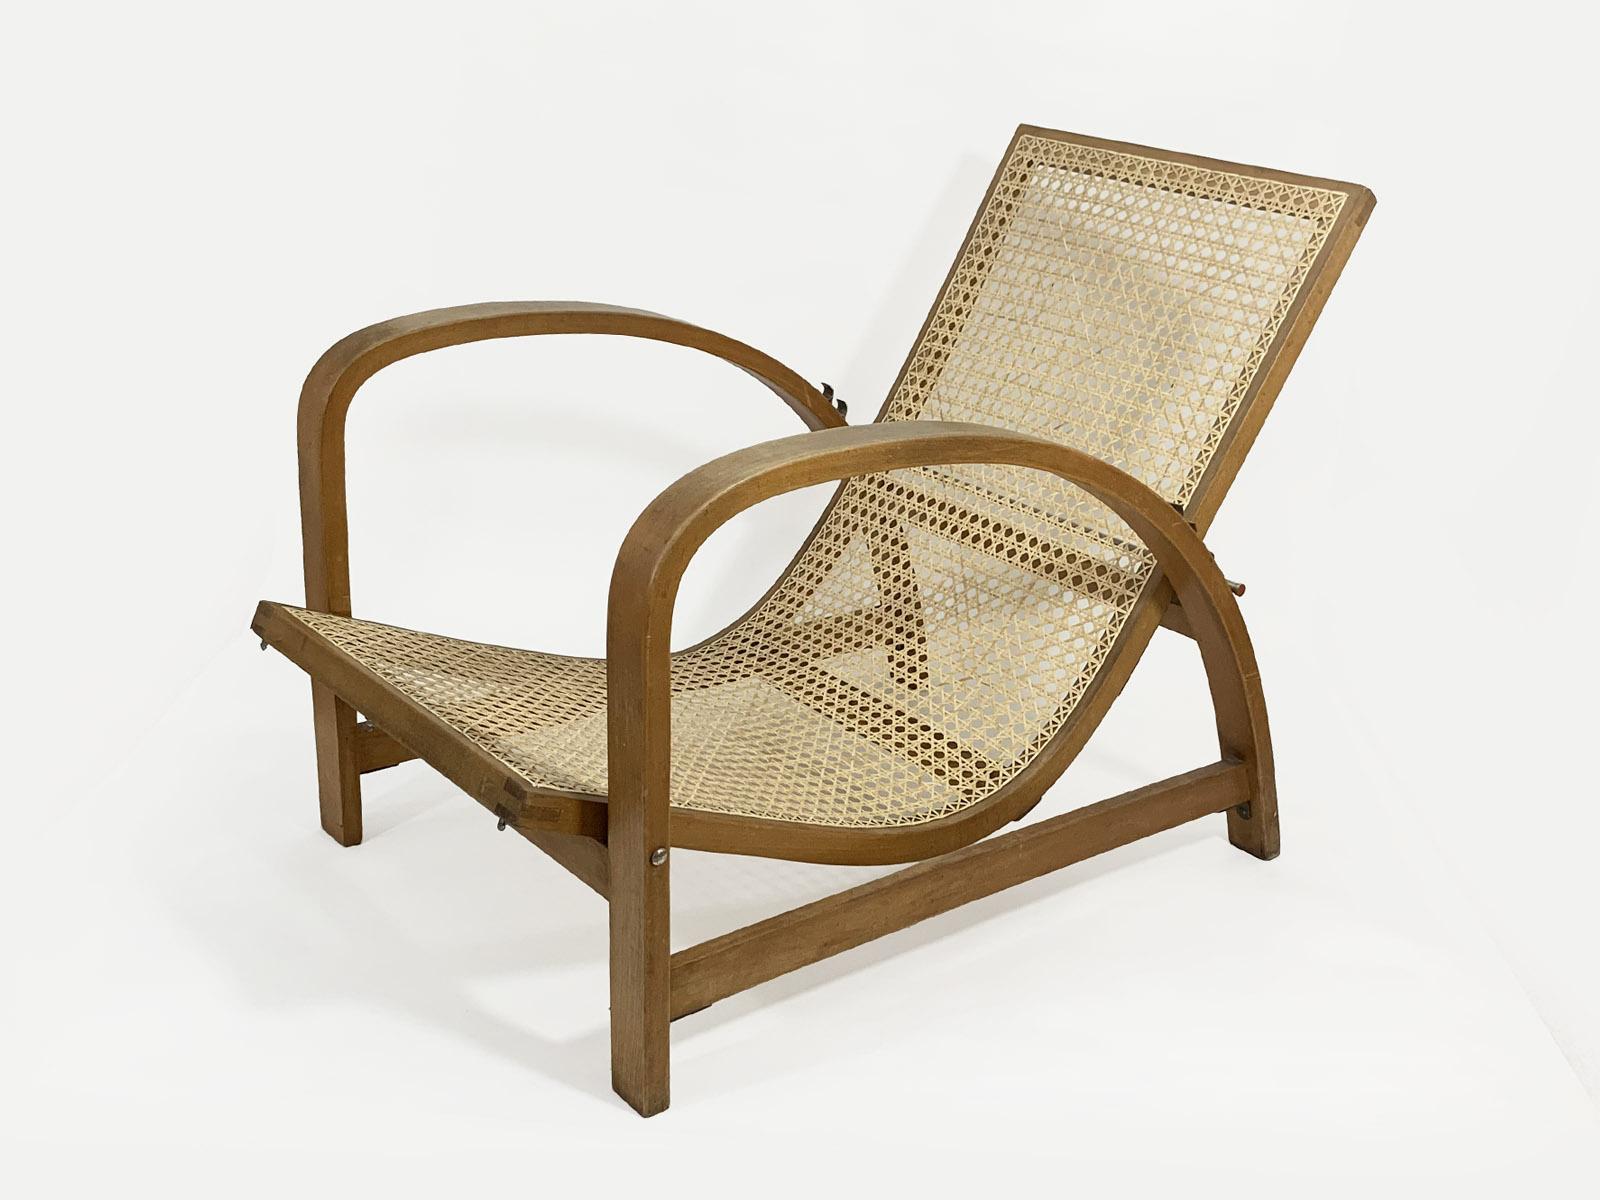 Beech wood and cane reclining chair by Jindrich Halabala, Czechoslovakia, 1930s.
Produced by Fischel.
Original condition, cane restored. We also have the original seat cover for this chair that can be restored for you, please ask for additional